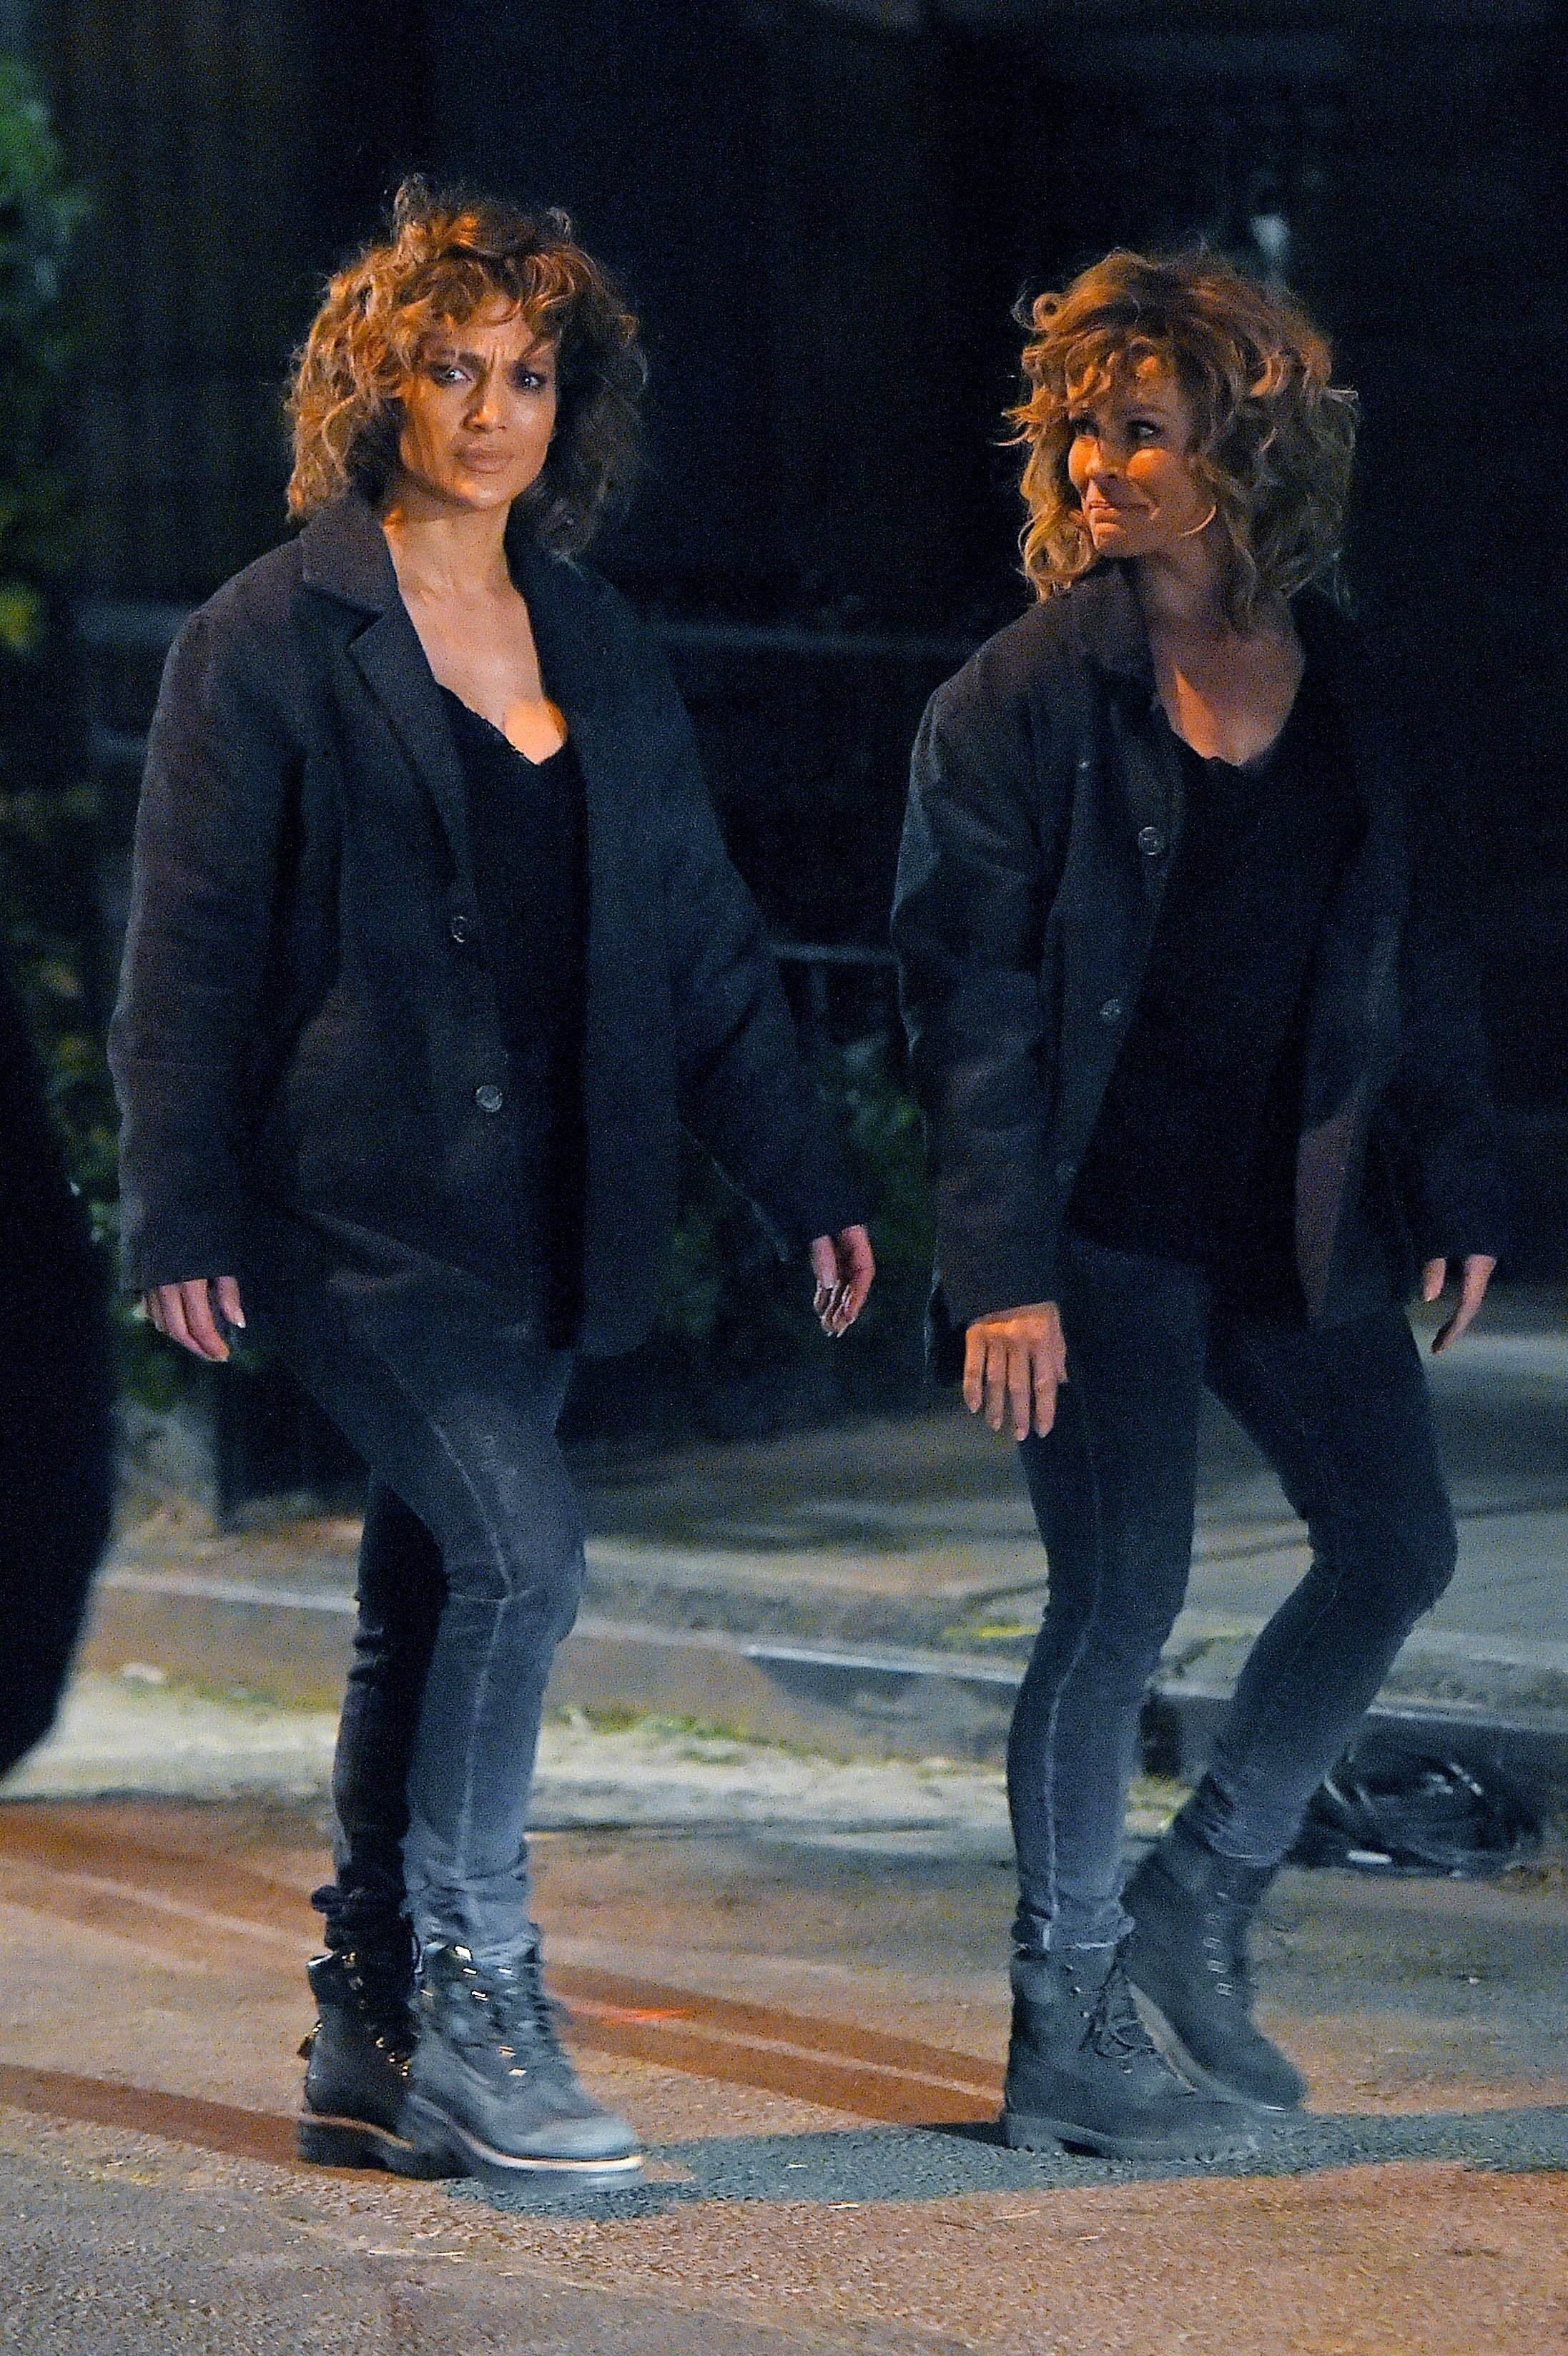 JLo and her body double walking and wearing ankle boots, leggings, and jackets